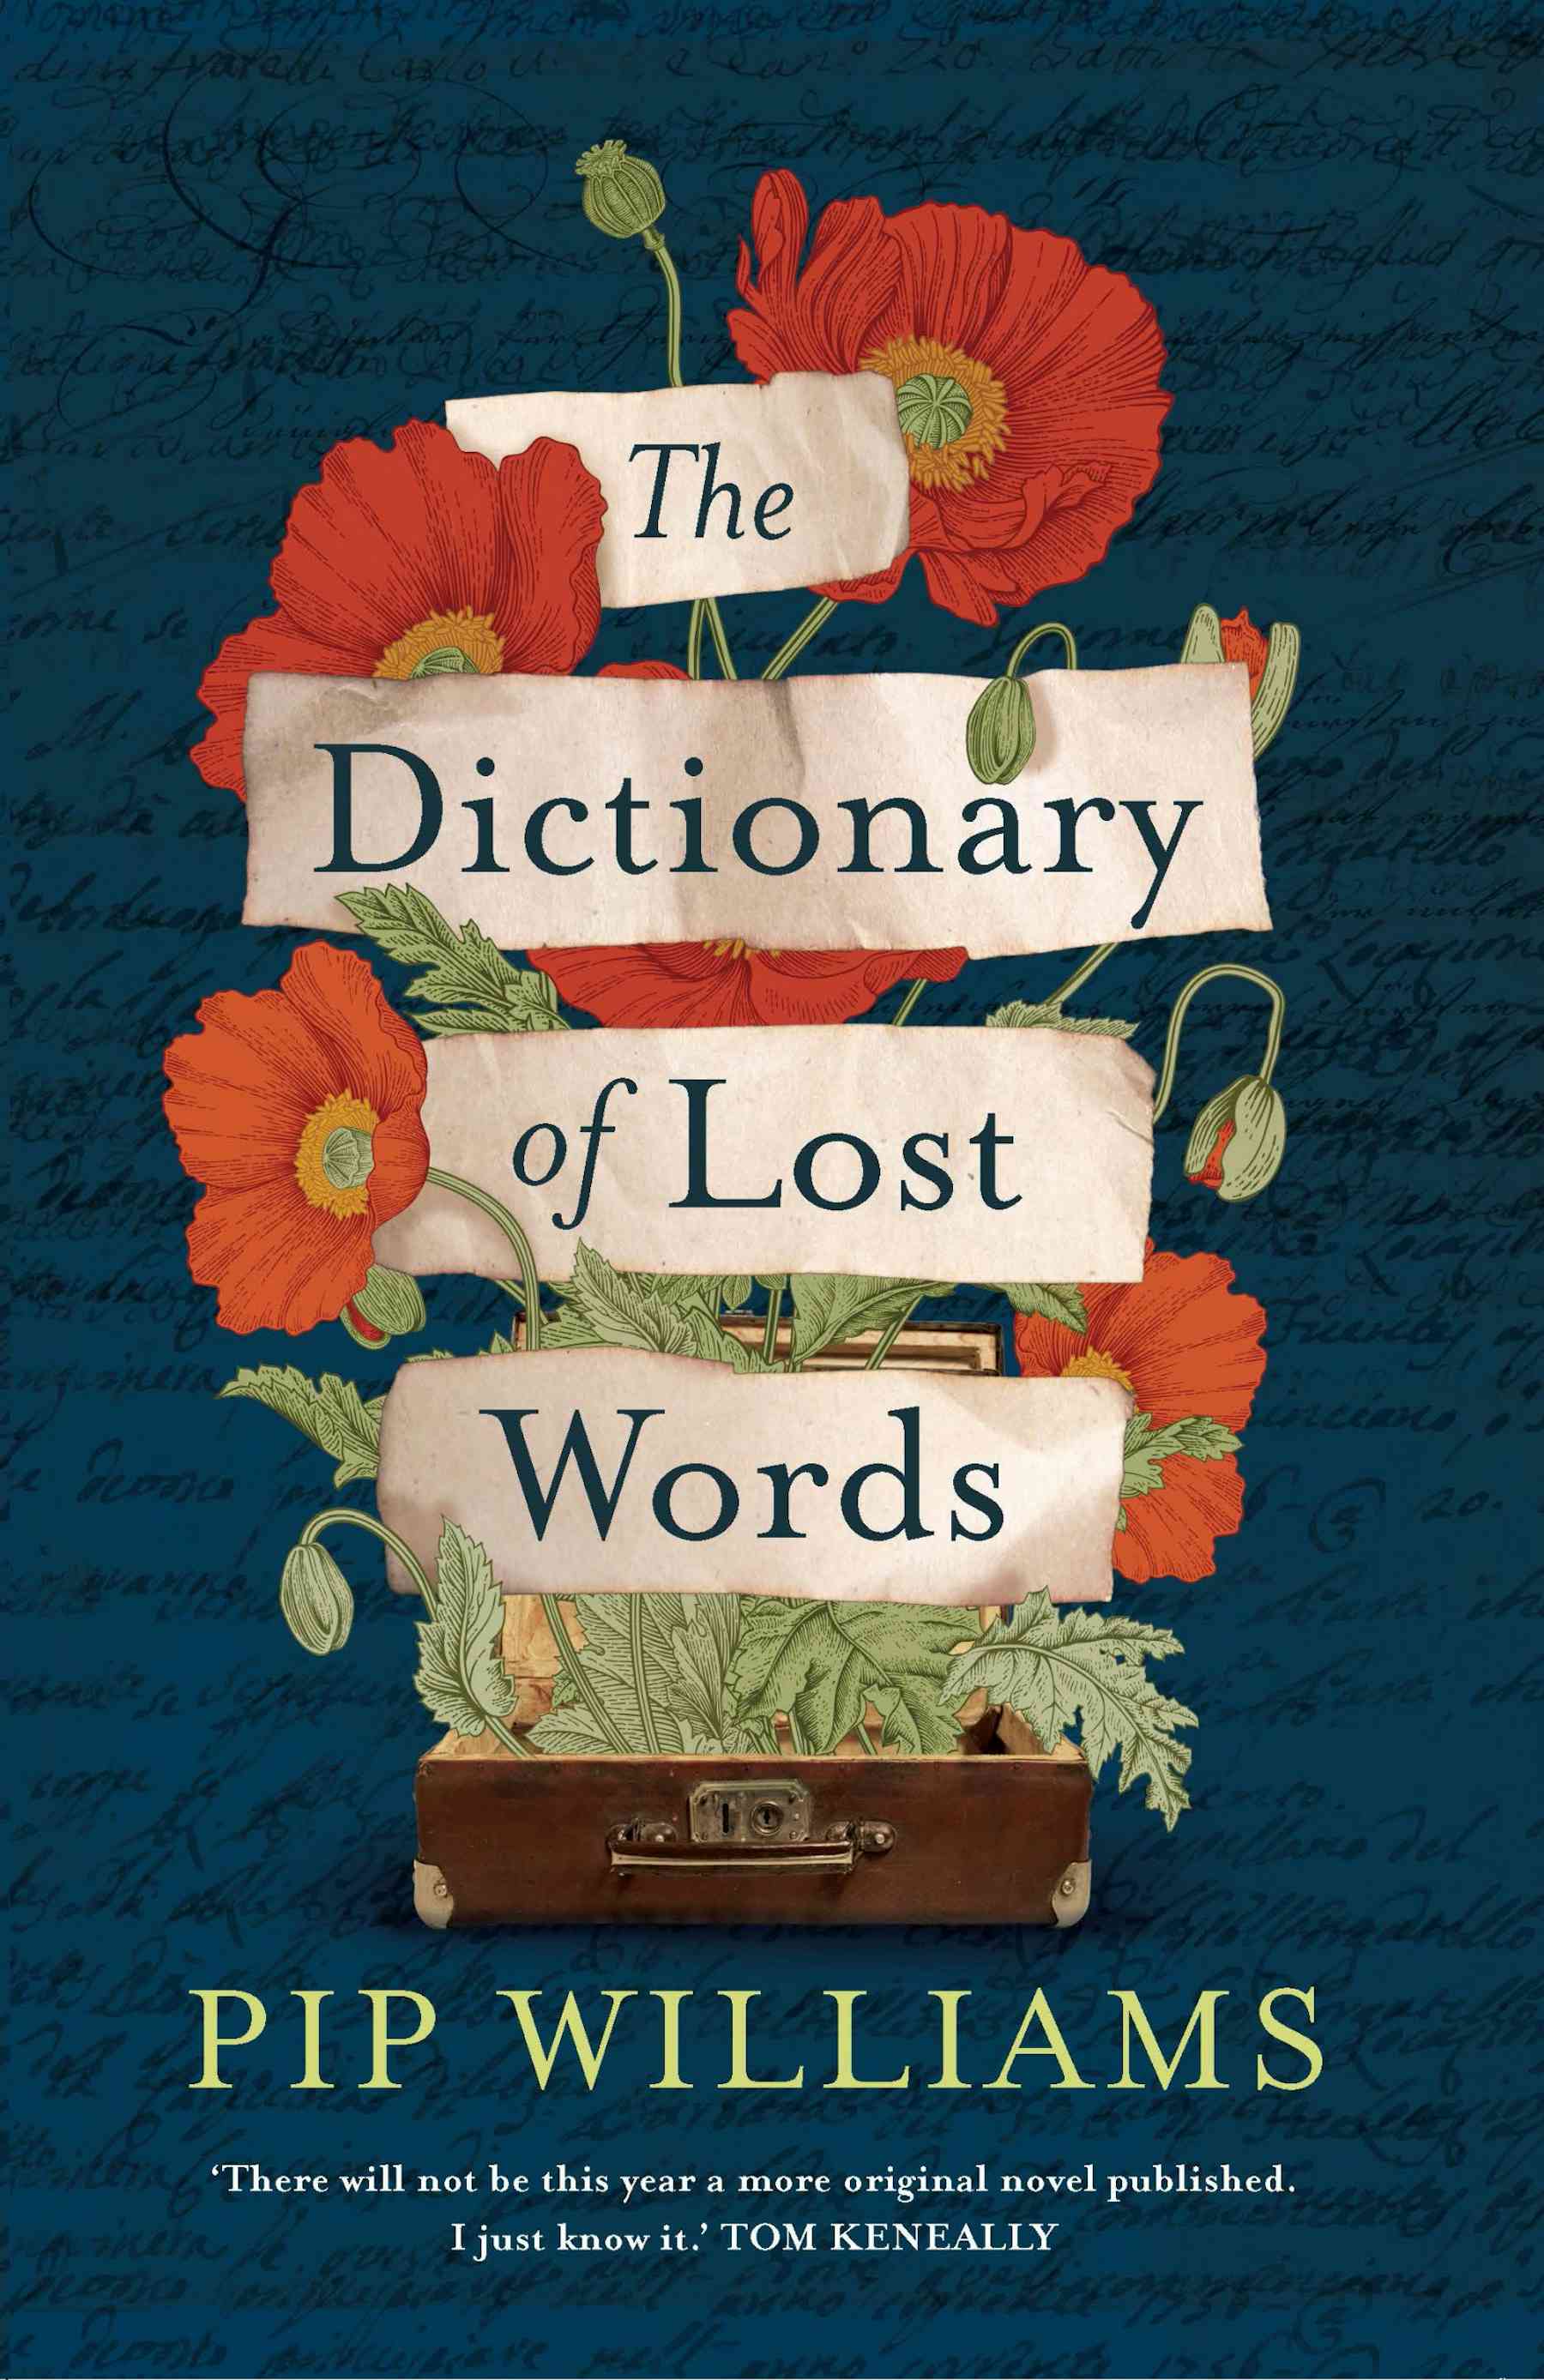 book-review-the-dictionary-of-lost-words-by-pip-williams